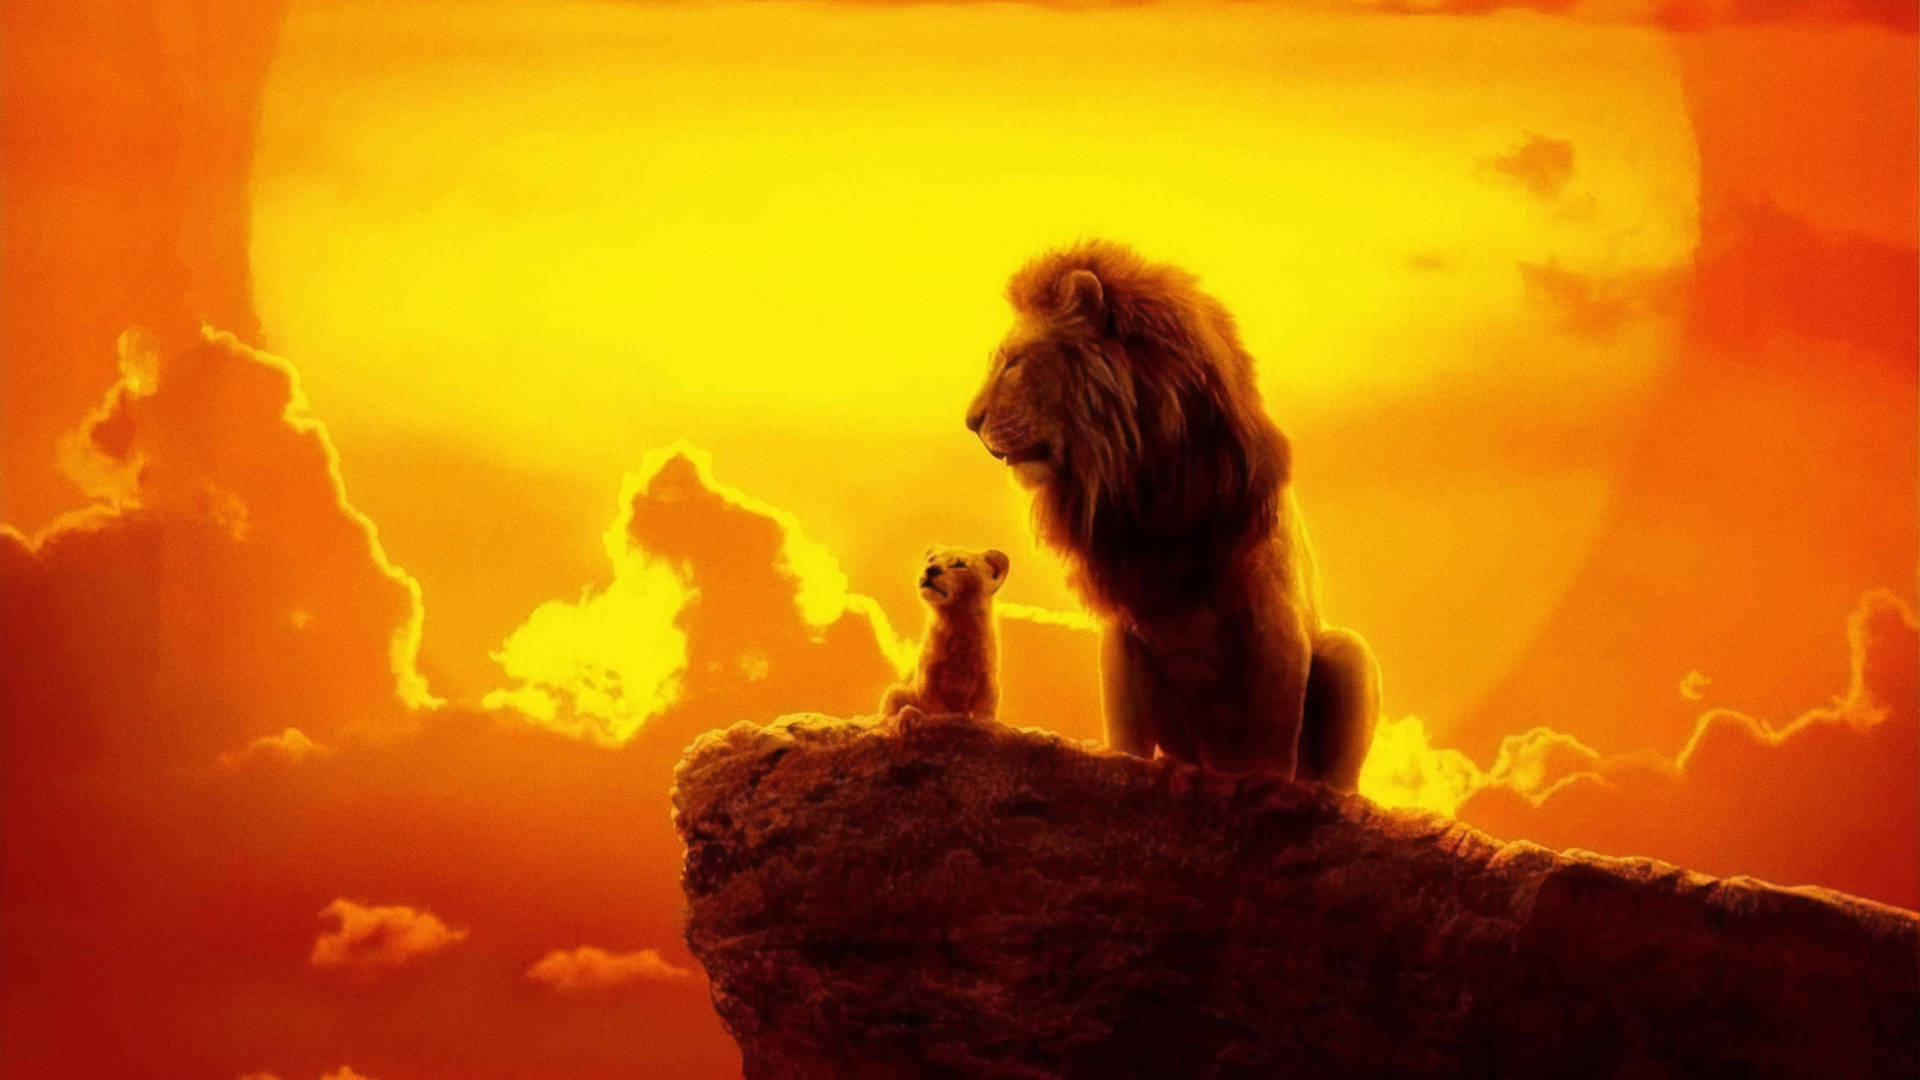 Join Simba on a journey of self-discovery with the classic story of The Lion King Wallpaper